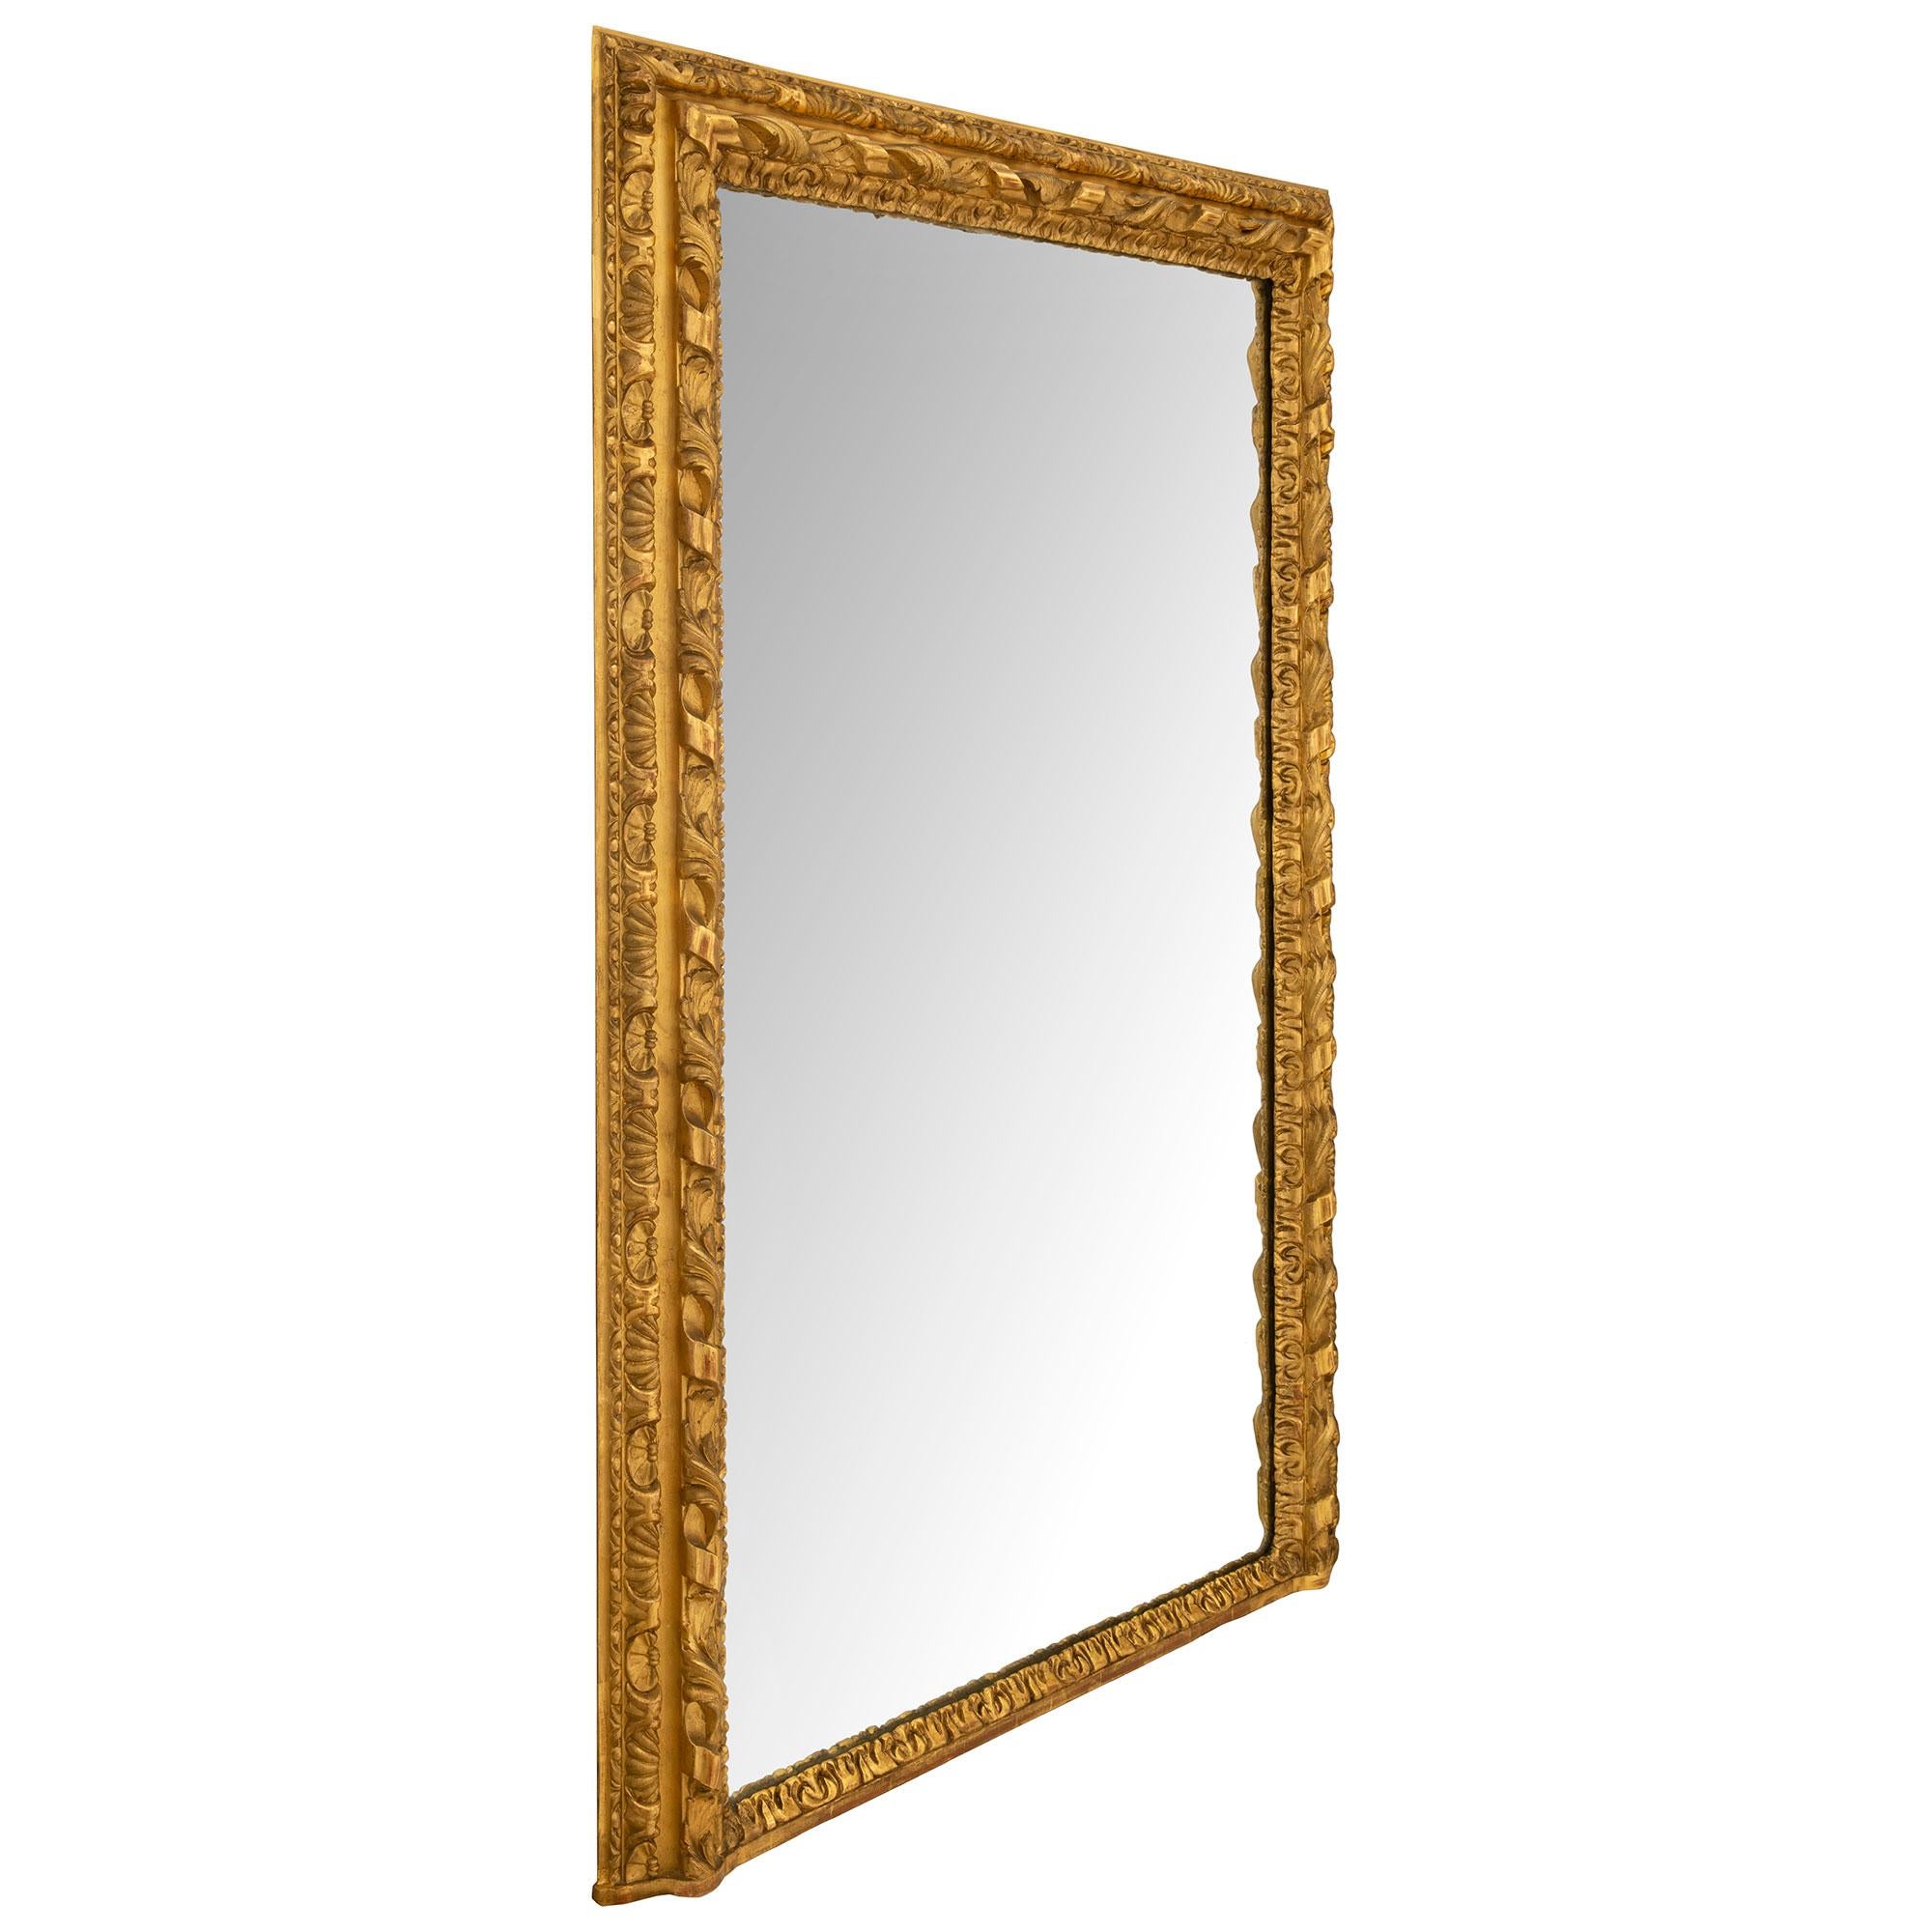 Italian 19th Century Giltwood Mirror In Good Condition For Sale In West Palm Beach, FL